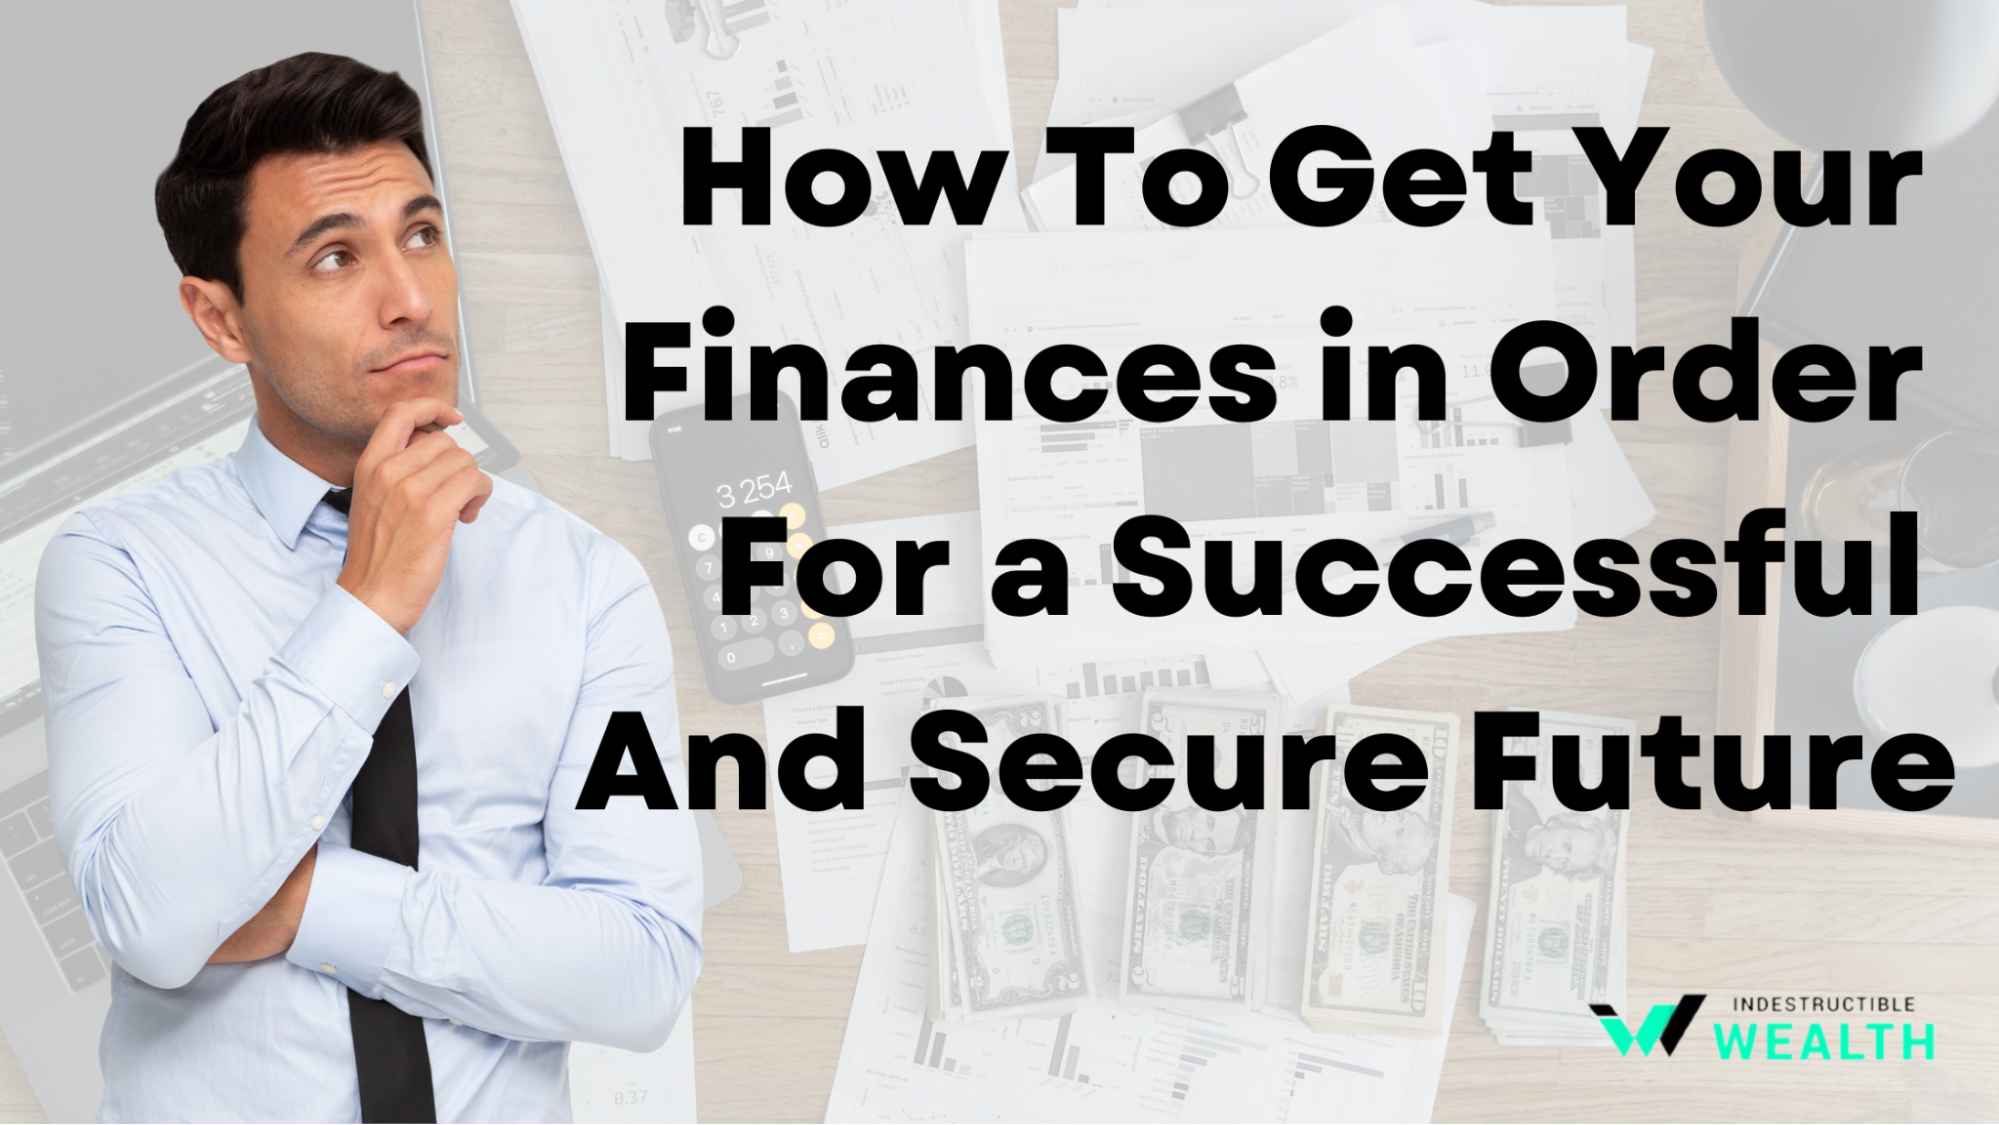 How To Get Your Finances in Order For a Successful And Secure Future